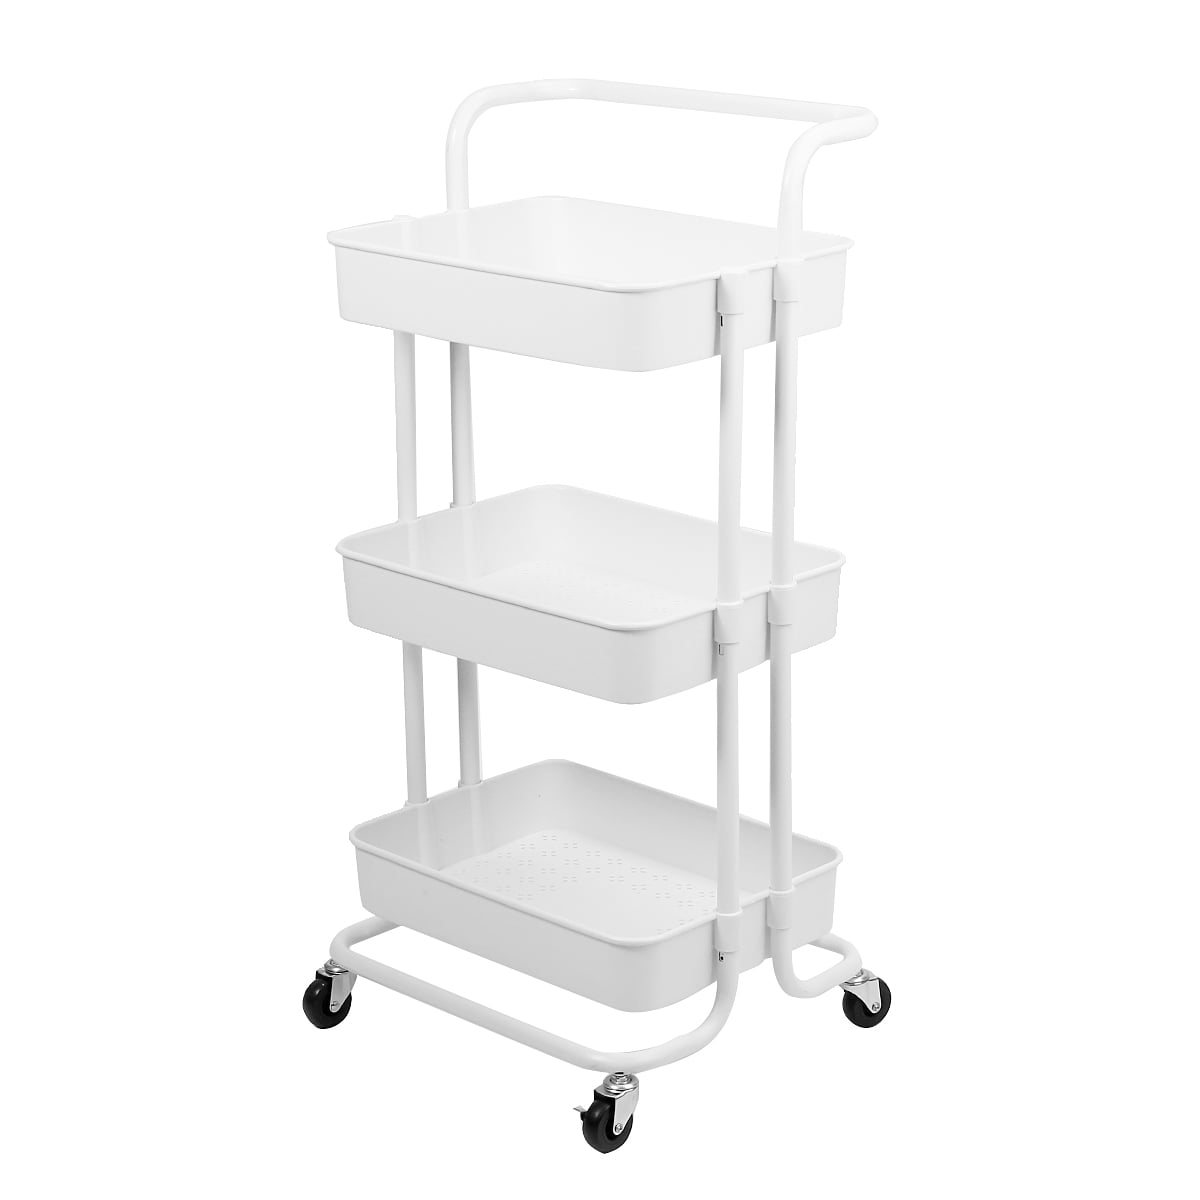 Details about   3 Tier Rolling Cart W/Wheels Practical Handle&ABS Basket Organizer White Home 